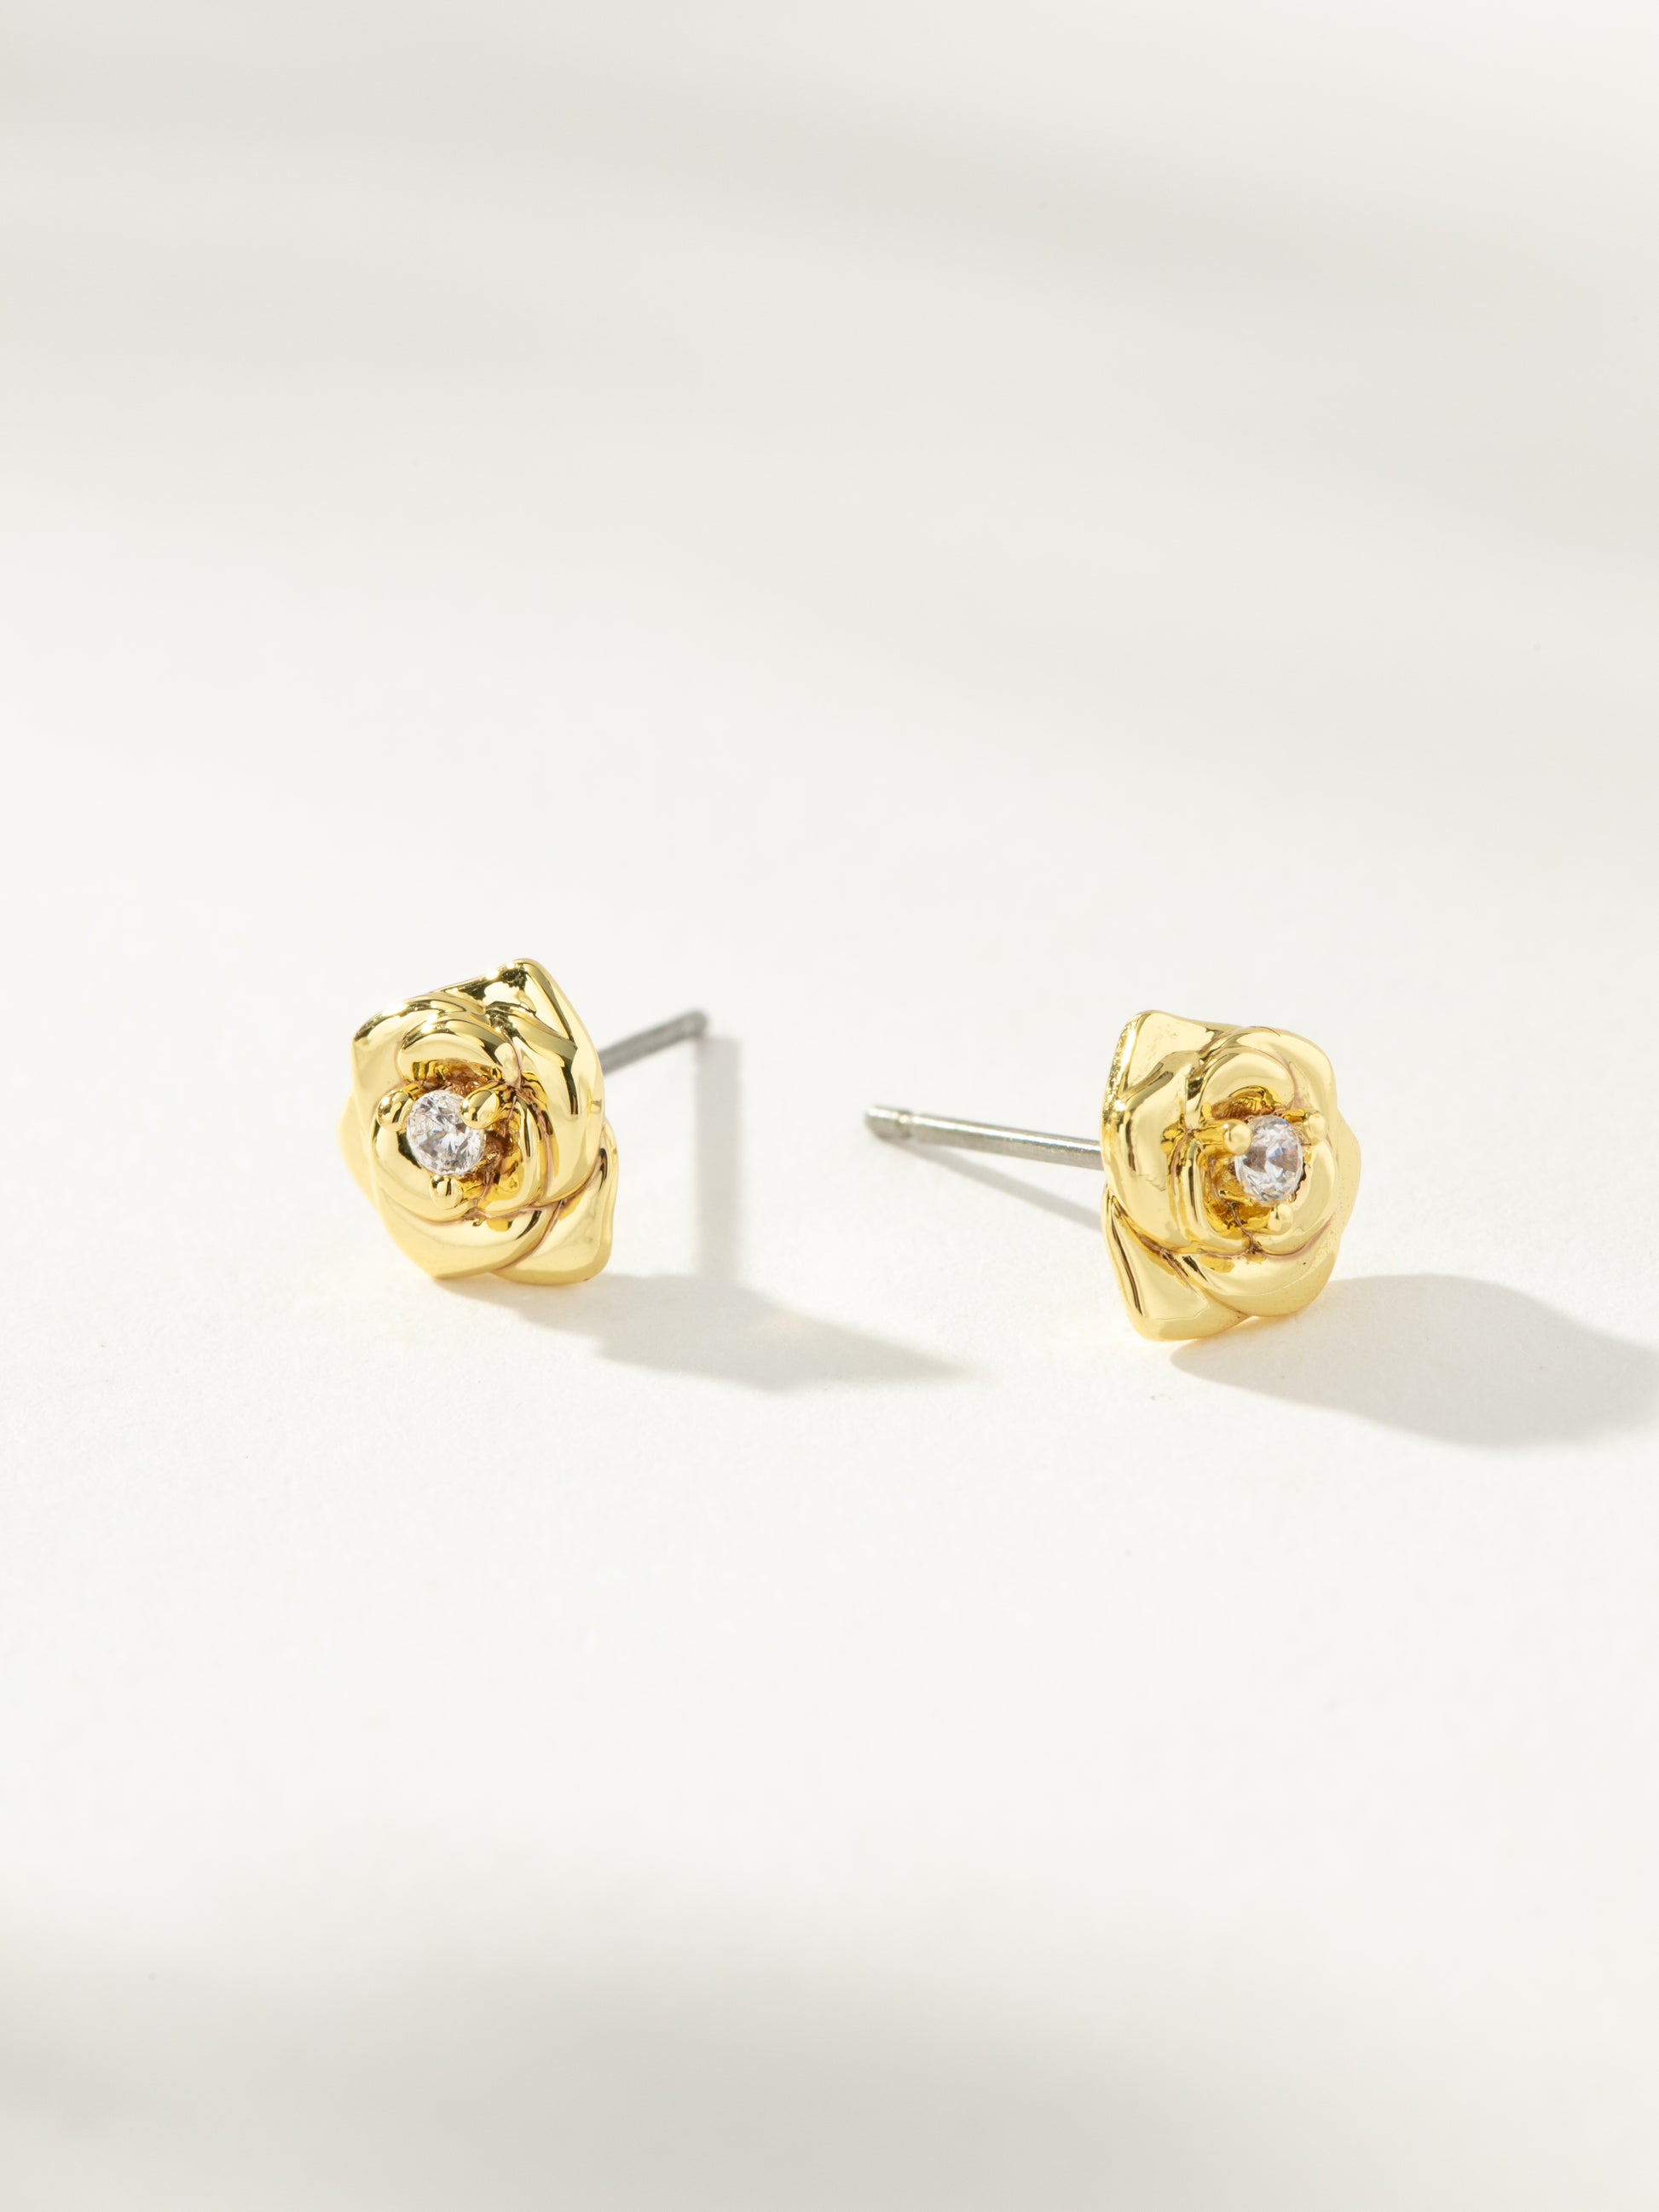 Rose Stud Earrings | Gold | Product Image | Uncommon James